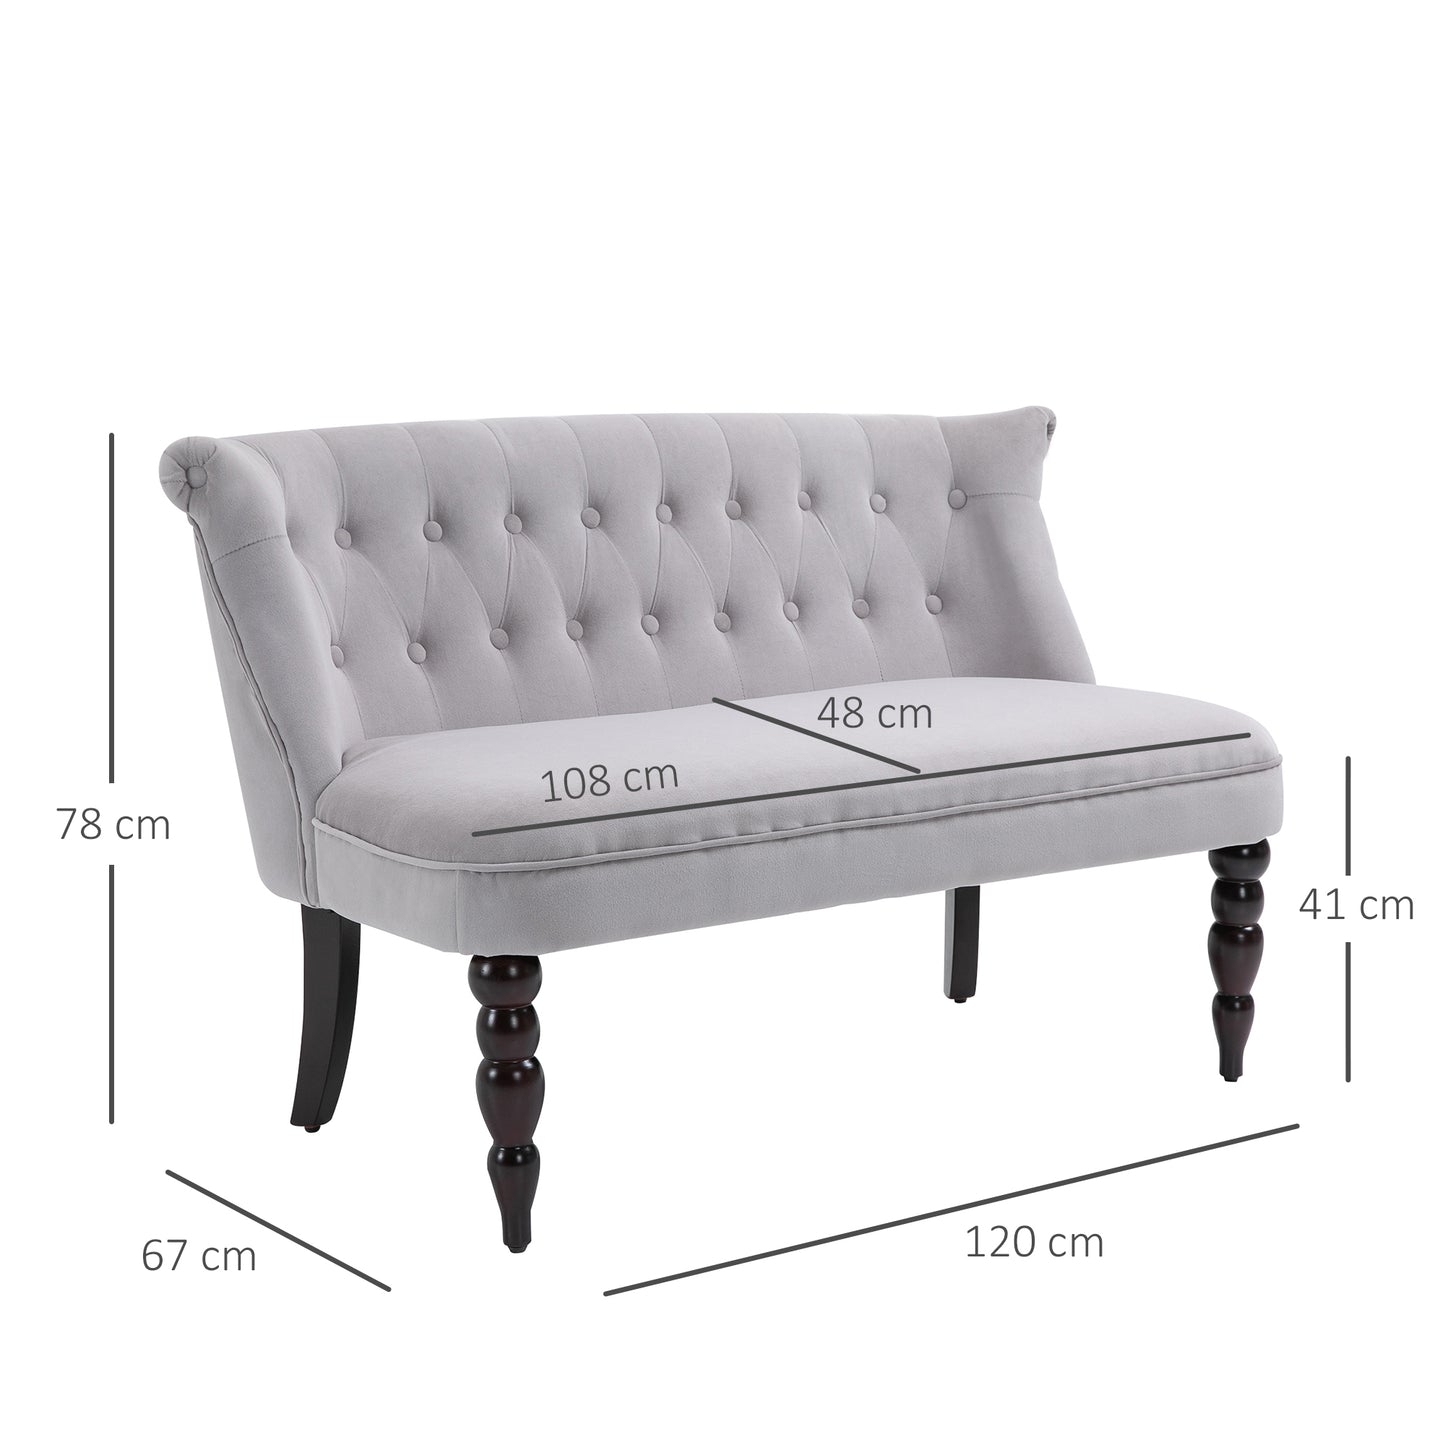 HOMCOM 2 Seat Sofa Lounger Couch with Wood Frame Button Tufts Carved Legs Vintage Design Compact Home Bedroom Loveseat, Grey